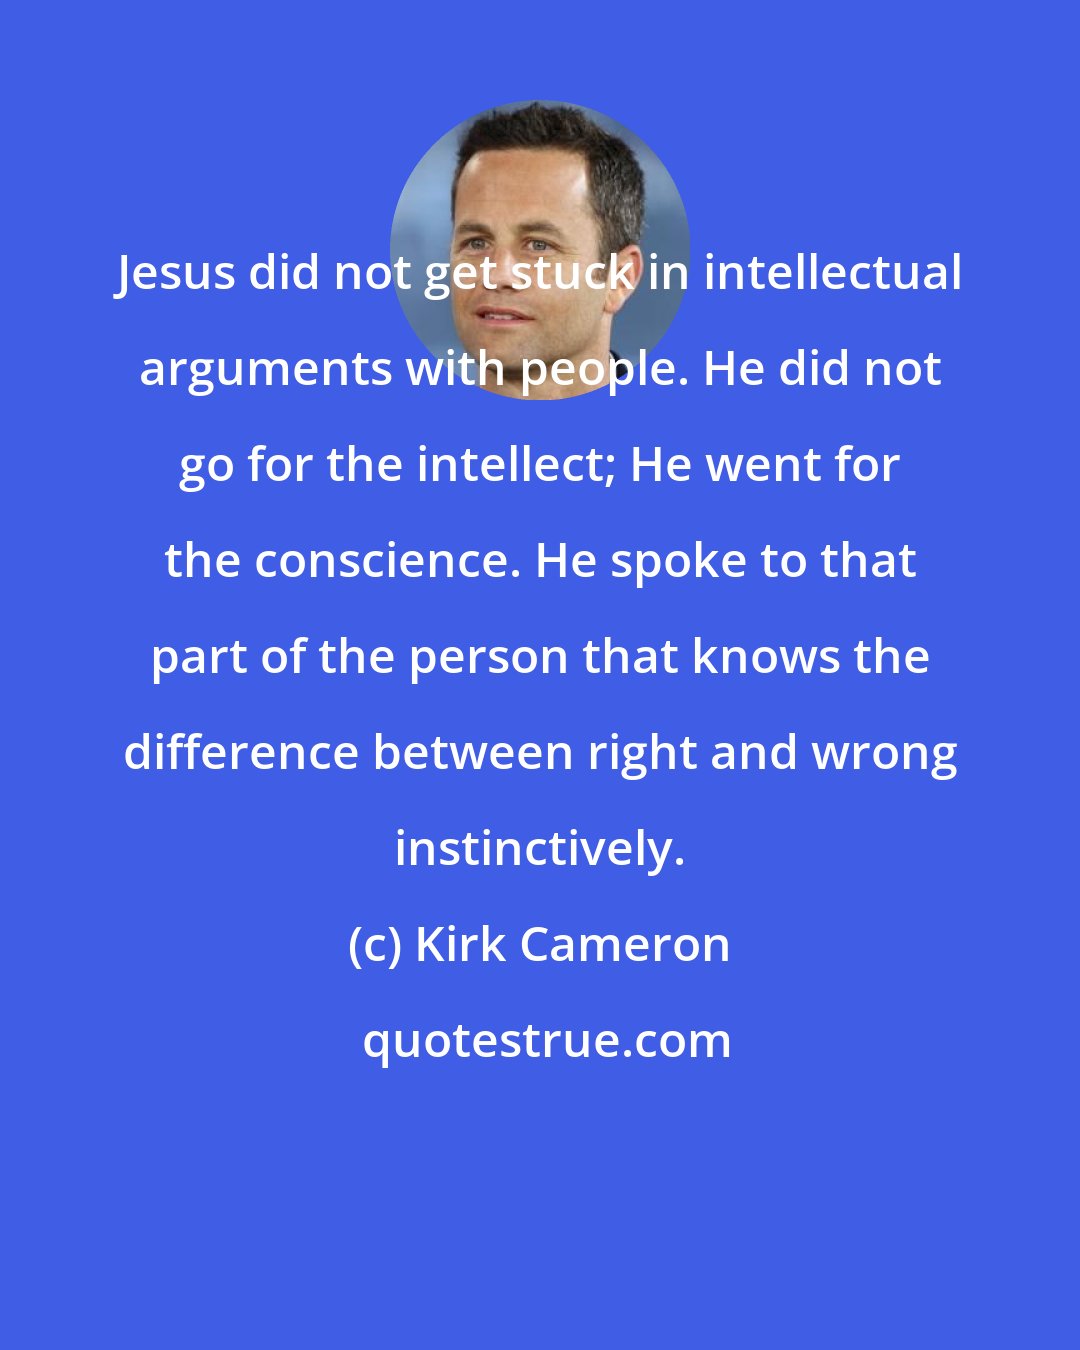 Kirk Cameron: Jesus did not get stuck in intellectual arguments with people. He did not go for the intellect; He went for the conscience. He spoke to that part of the person that knows the difference between right and wrong instinctively.